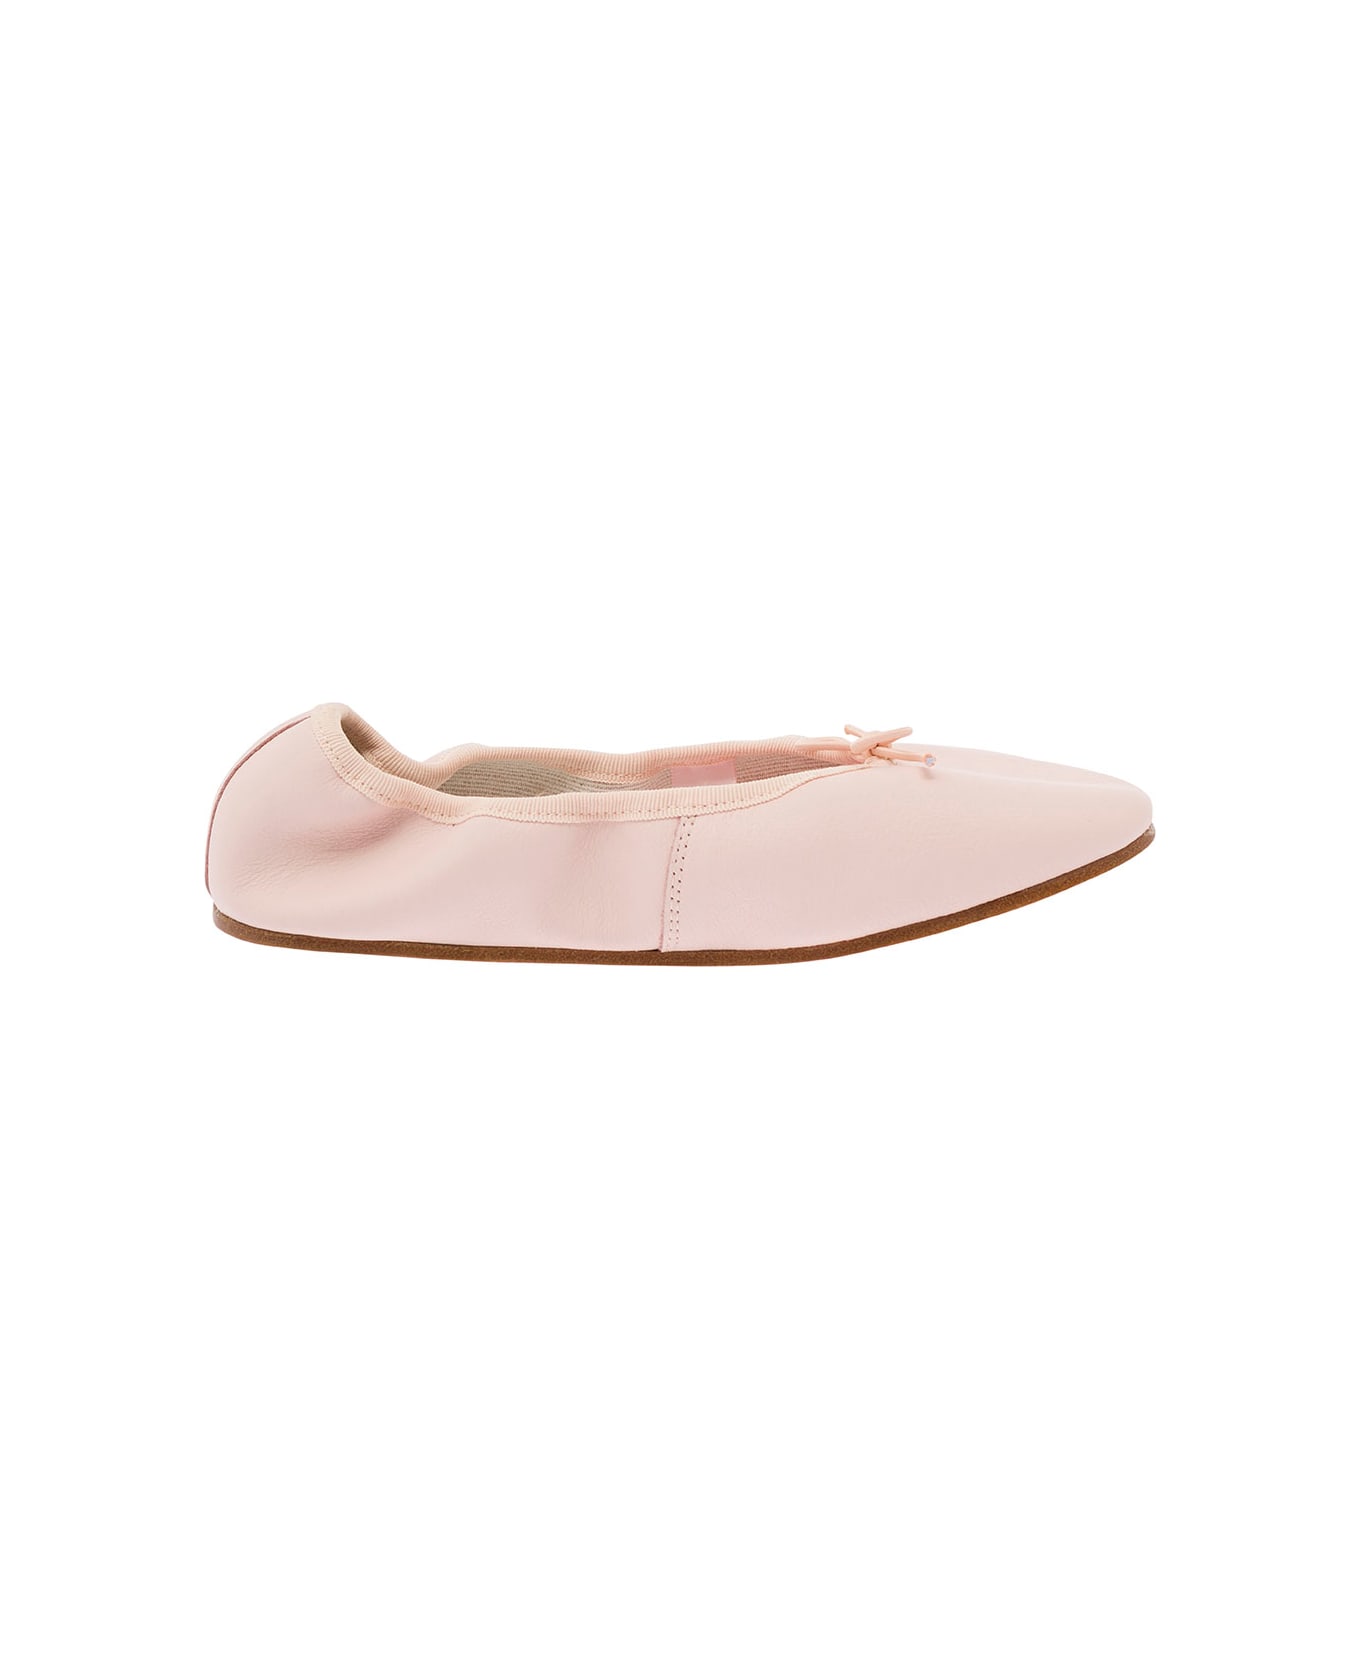 Repetto 'sofia' Pink Ballet Flats With Ribbon In Leather Woman - Pink